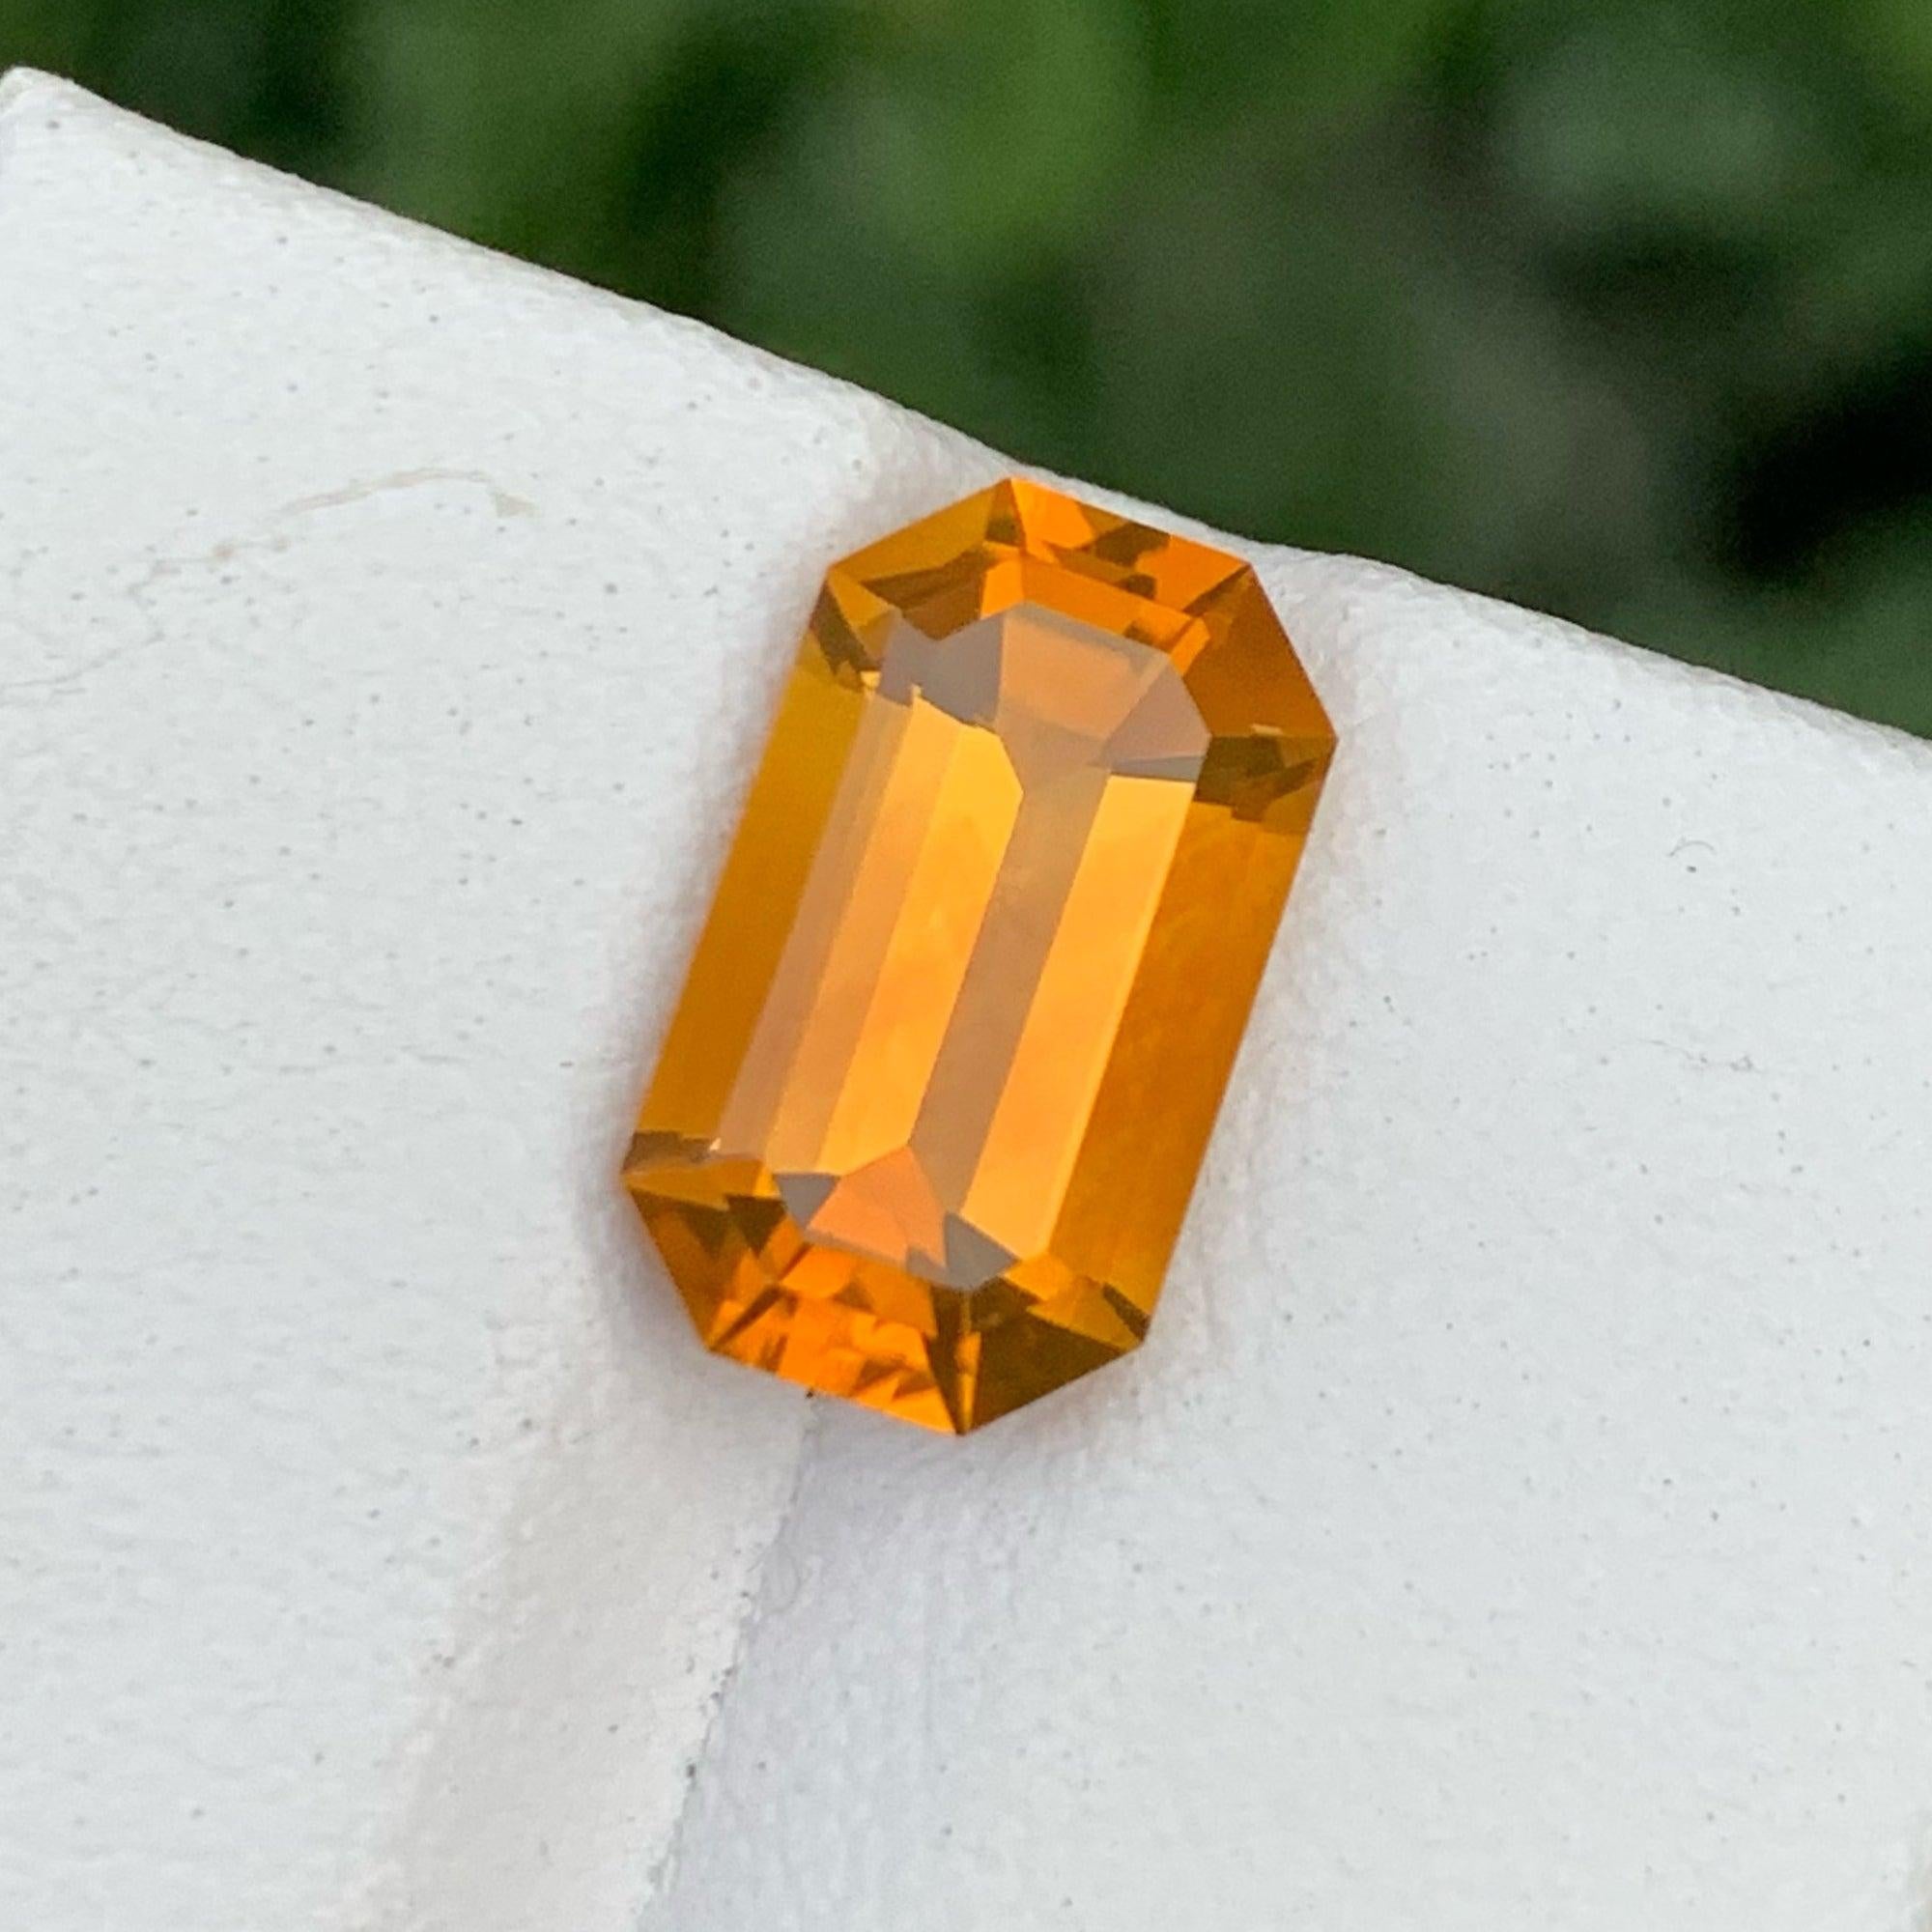 Marvelous Intense Orange Citrine Gemstone of 3.35 carats from Madeira,Portugal has a wonderful cut in a Ocatgon shape, incredible Yellow color. Great brilliance. This gem is totally loupe-clean.

Product Information:
GEMSTONE TYPE:	Marvelous Intense